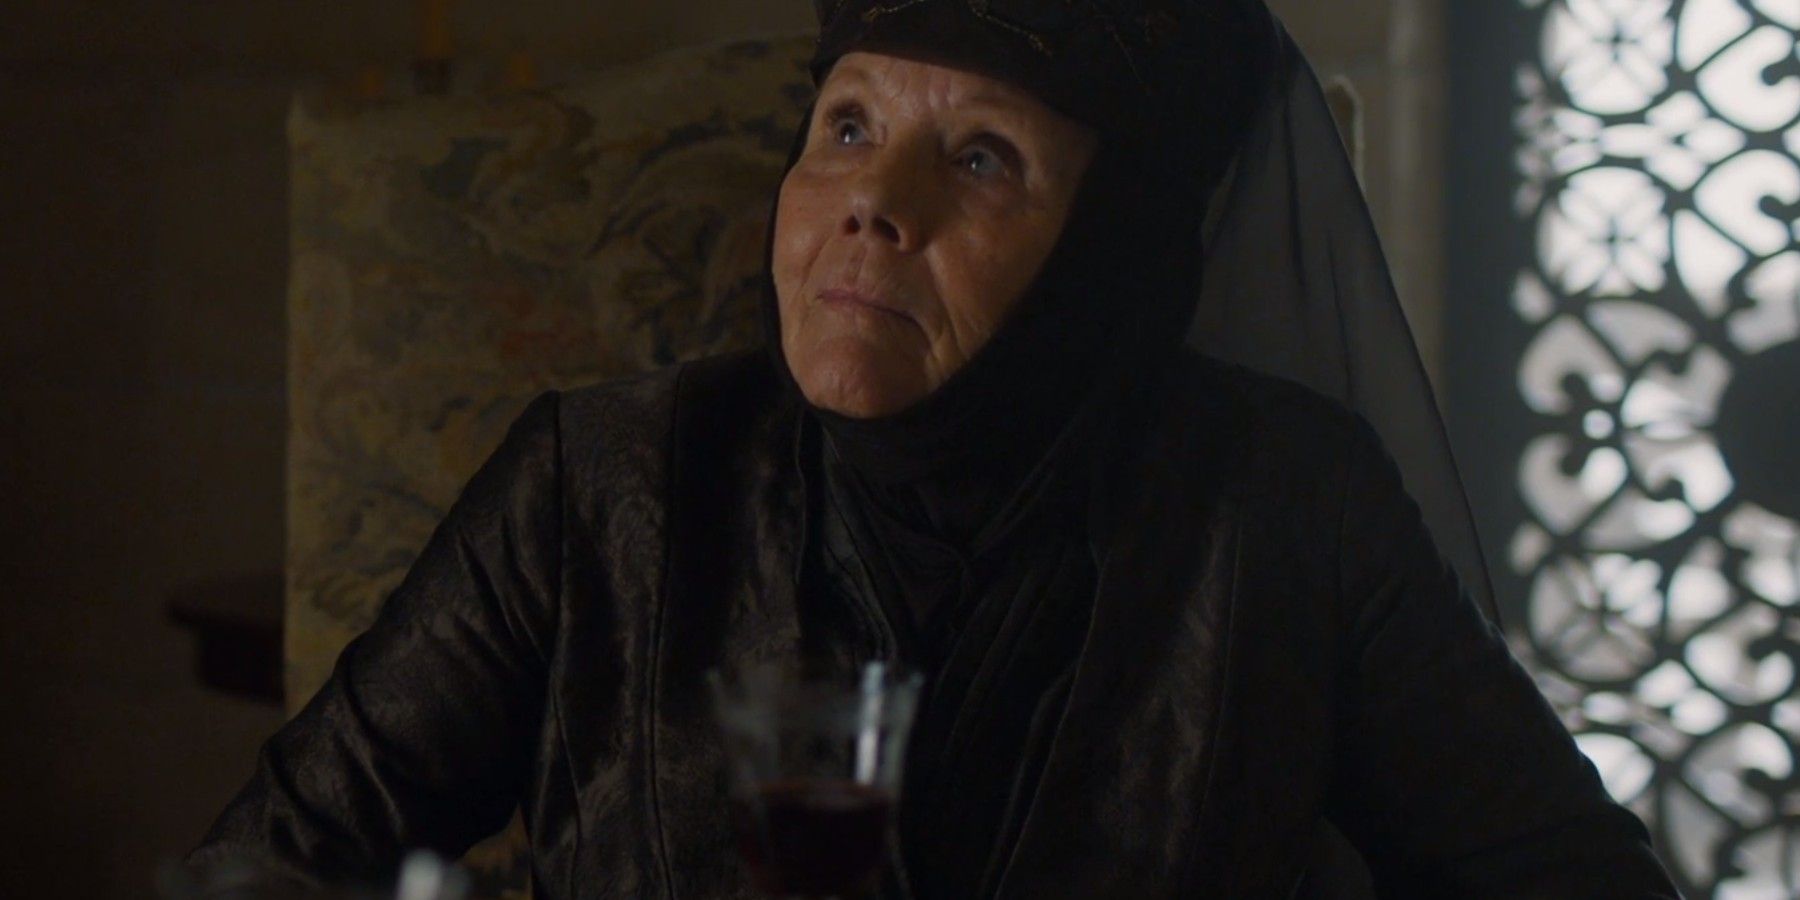 Diana Rigg as Olenna Tyrell in Game of Thrones